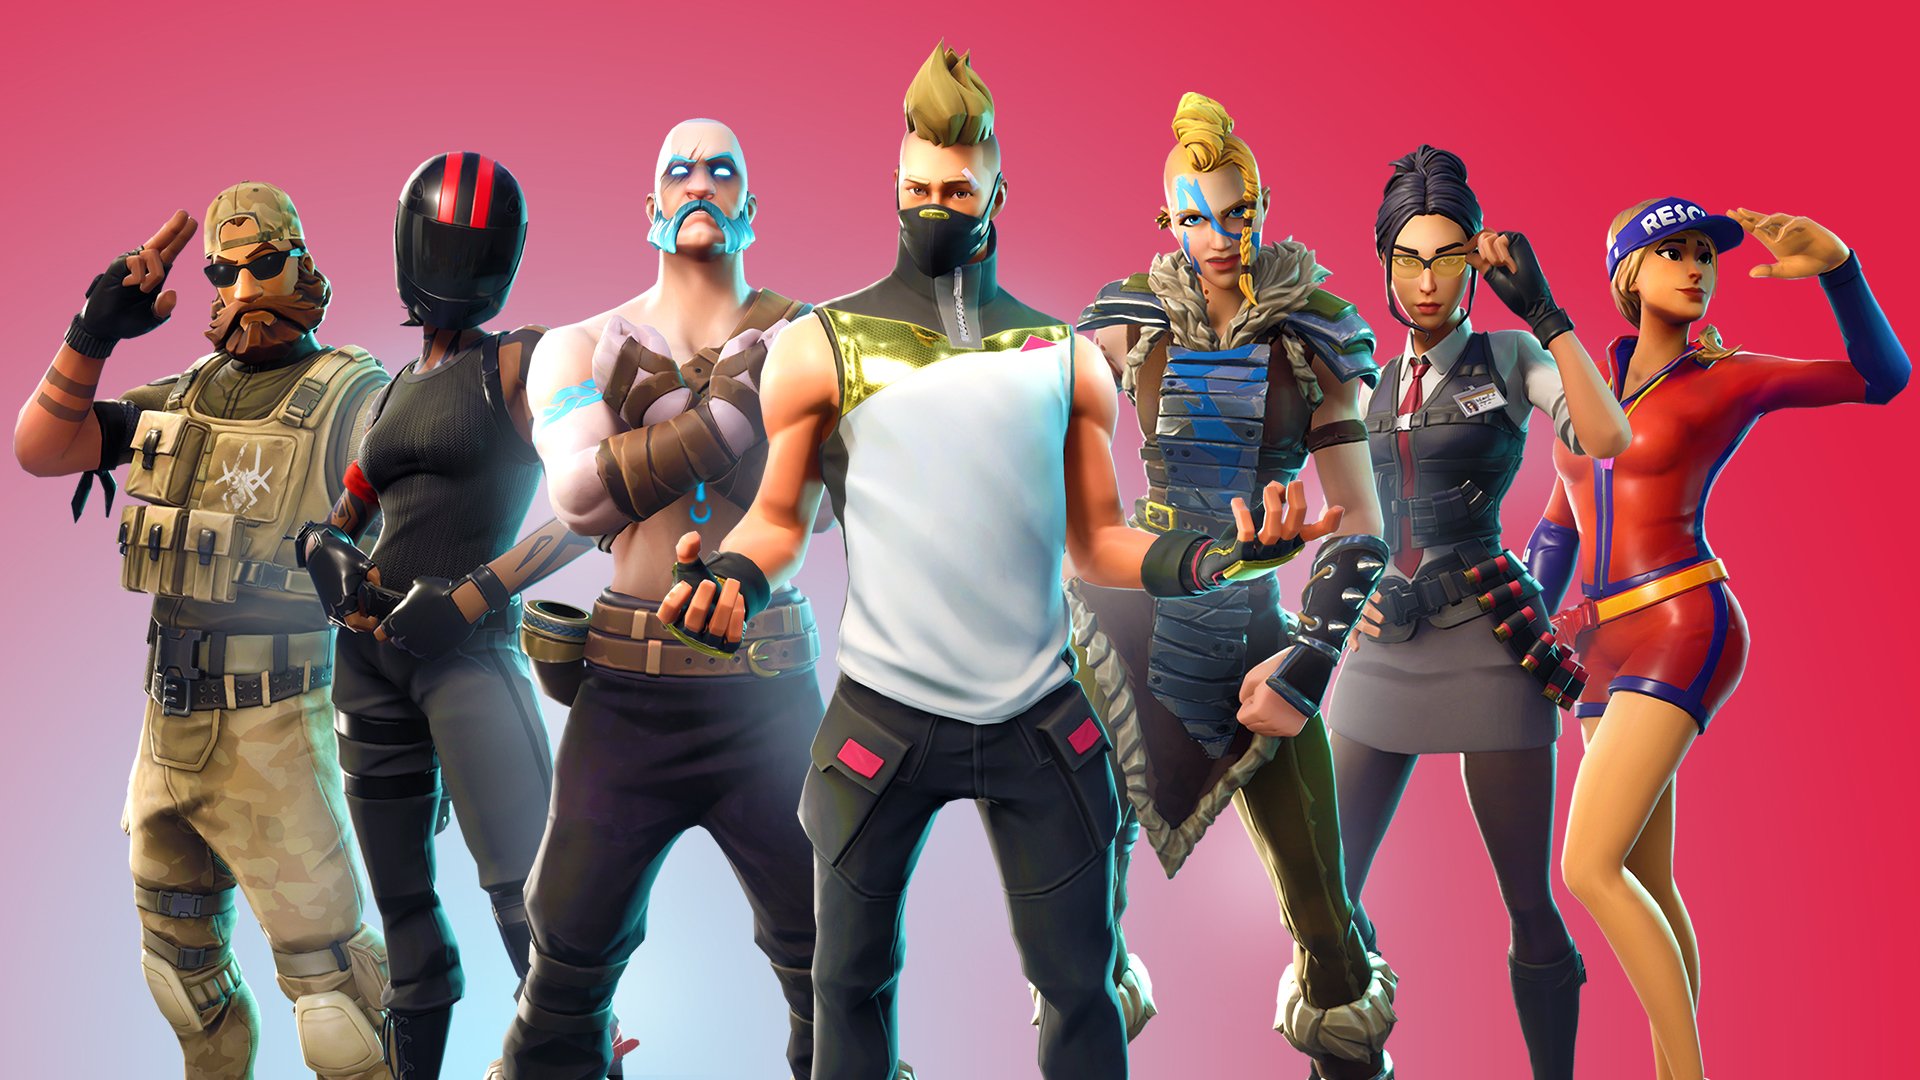 PlayStation will allow cross-play in Fortnite with Xbox ... - 1920 x 1080 jpeg 1345kB